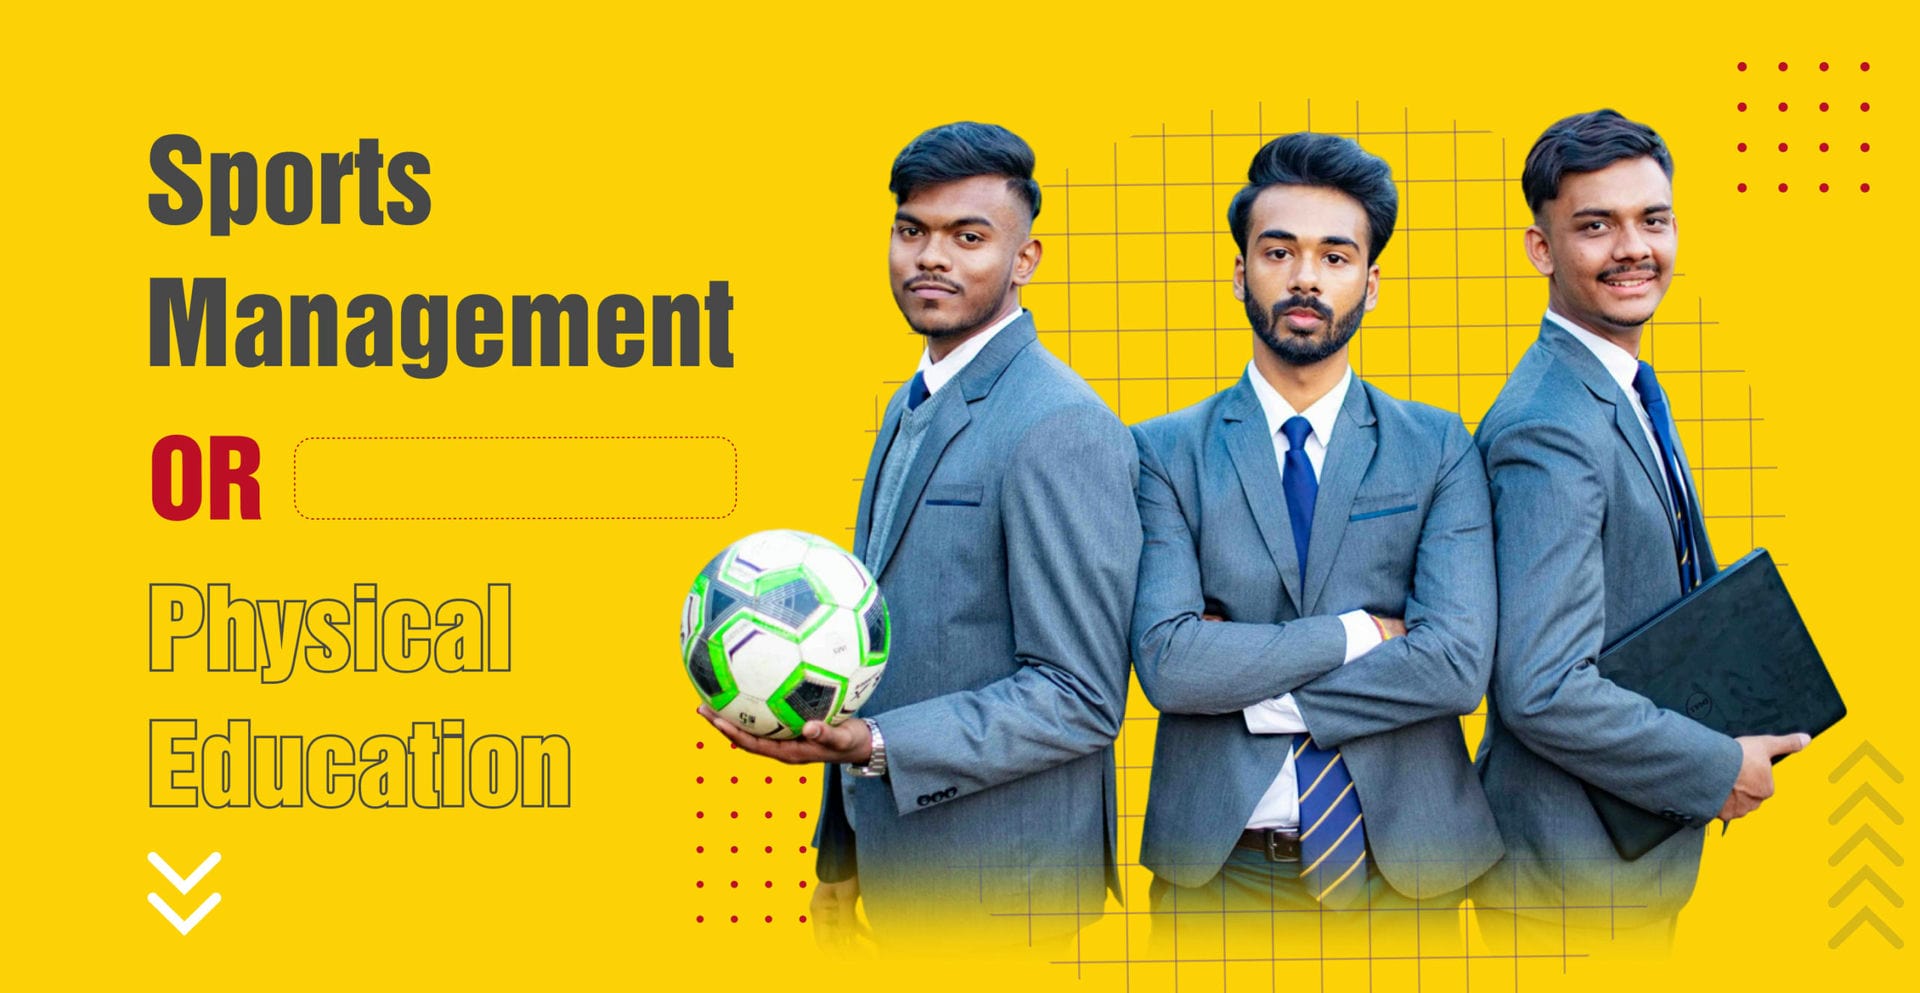 Why study Bachelor in Sports management?